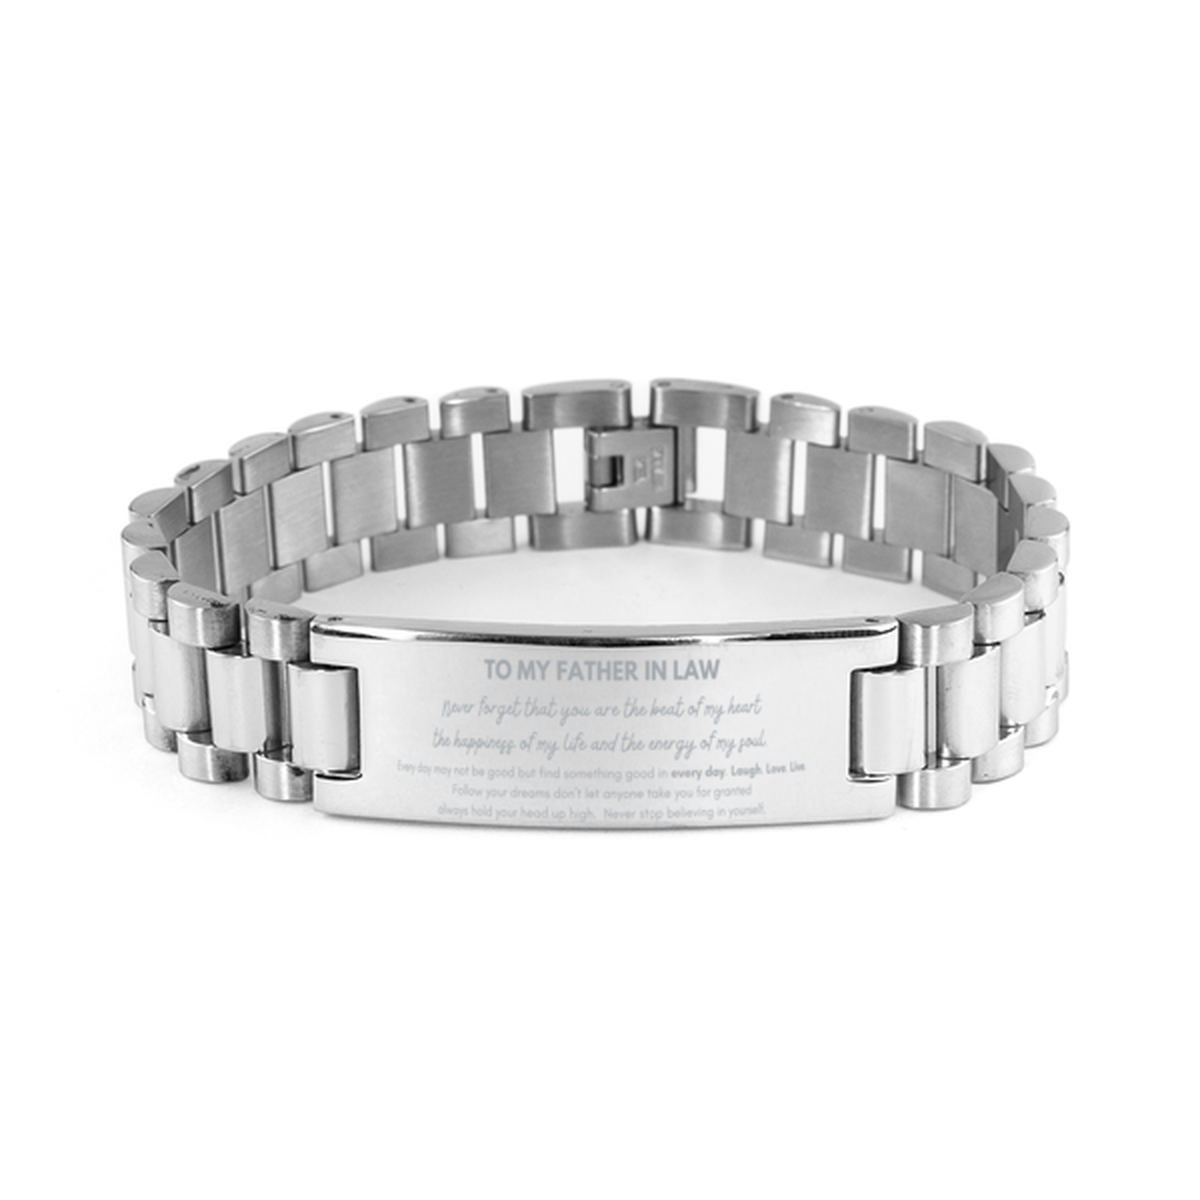 To My Father In Law Bracelet Gifts, Christmas Father In Law Ladder Stainless Steel Bracelet Present, Birthday Unique Motivational For Father In Law, To My Father In Law Never forget that you are the beat of my heart the happiness of my life and the energy